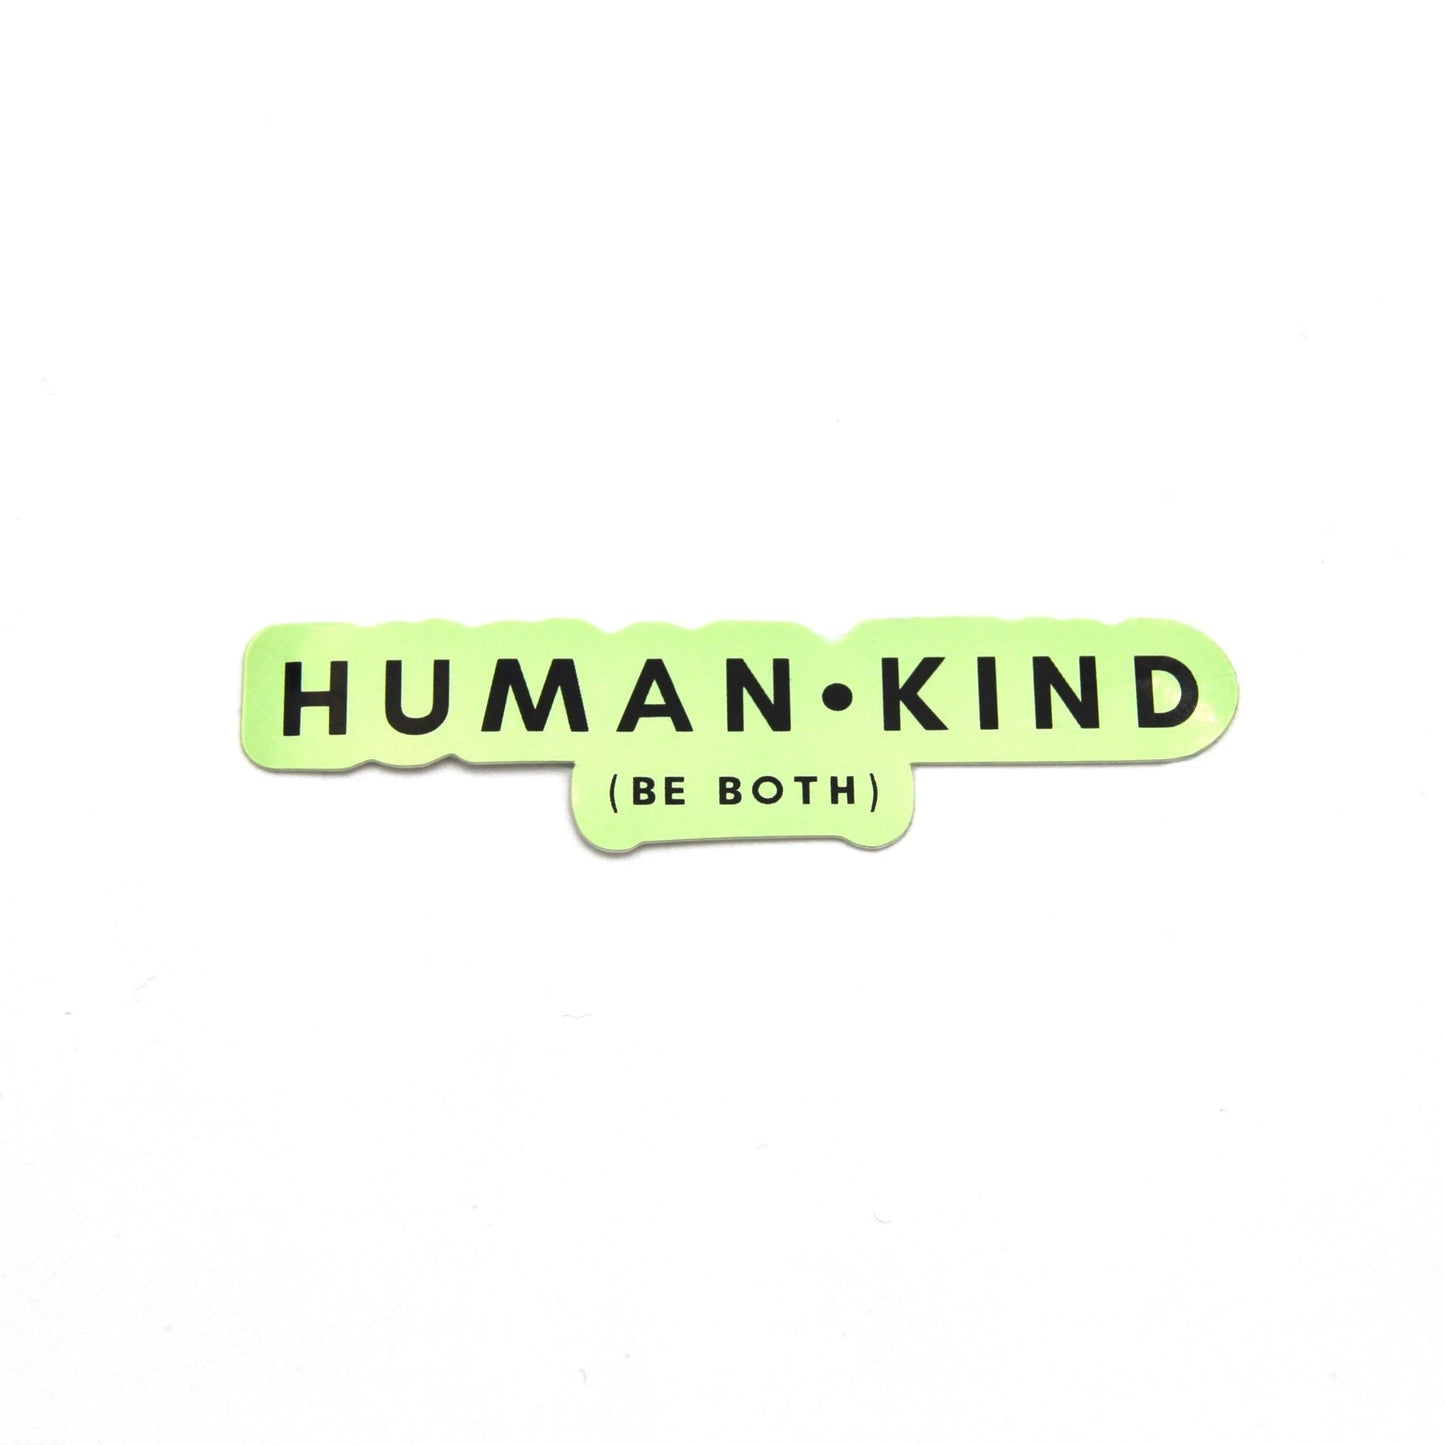 Load image into Gallery viewer, Human Kind Sticker Wear The Peace Stickers 0.5 inches x 3 inches
